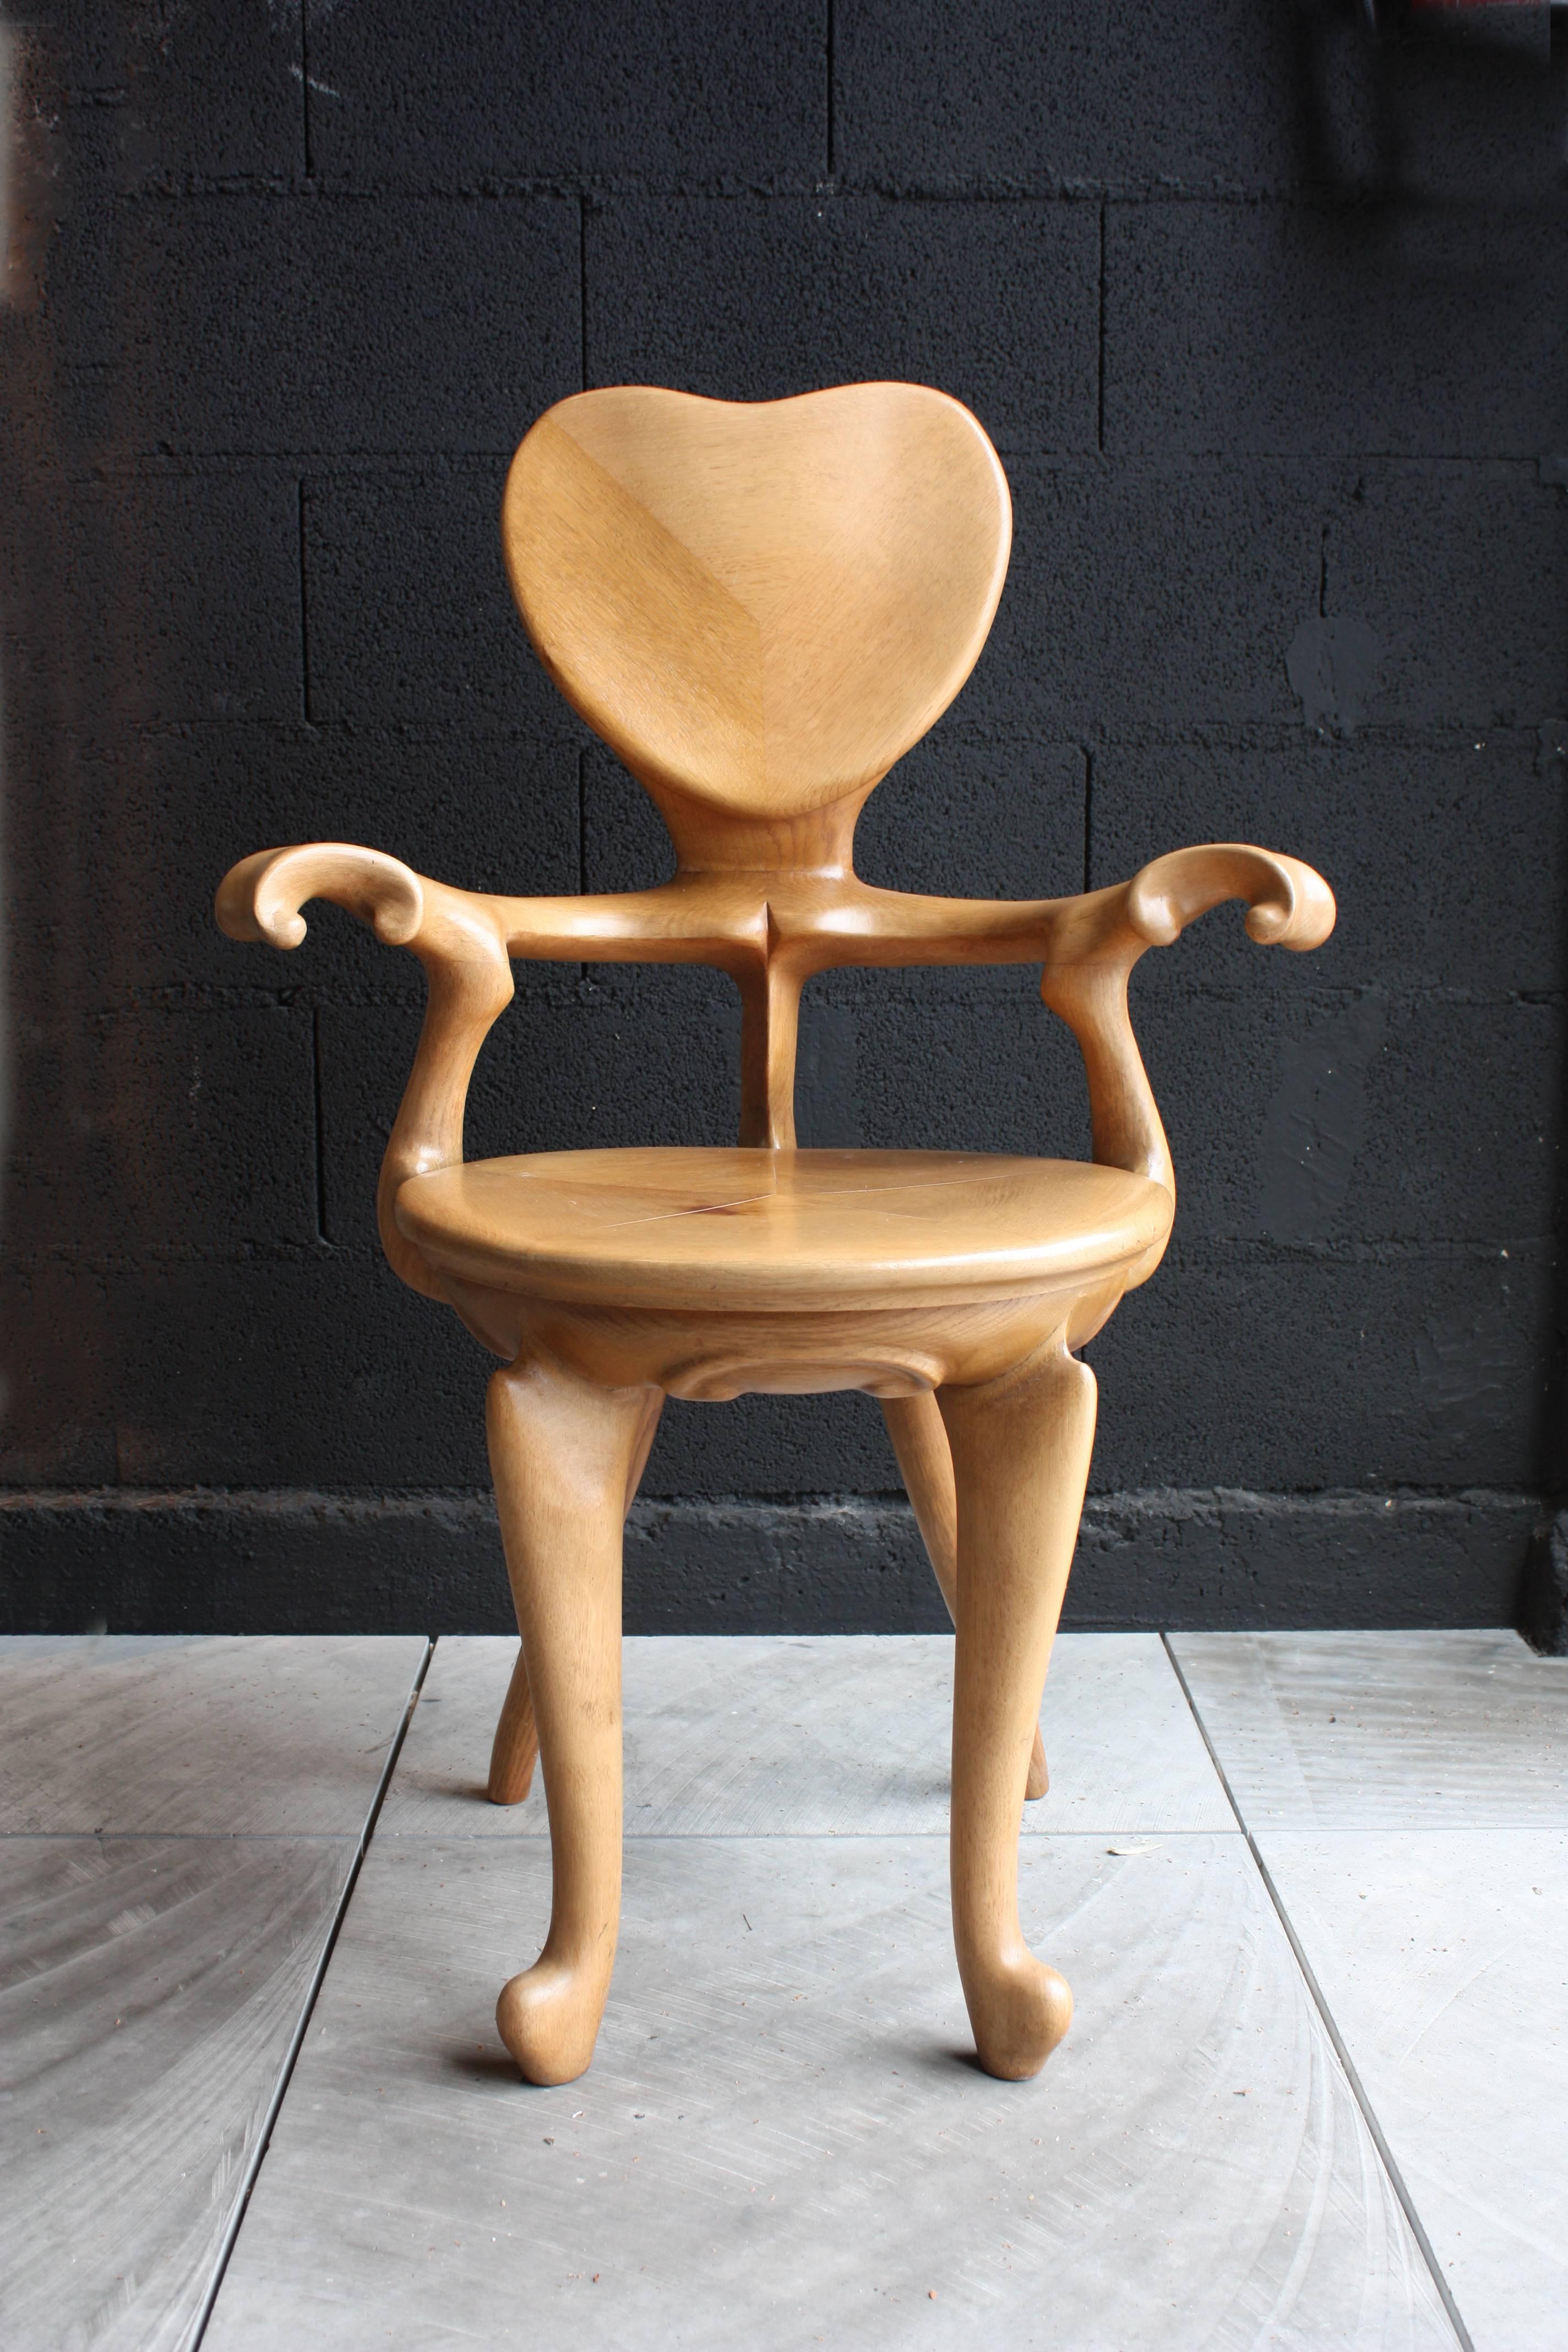 Casa Calvet armchair designed by Antonio Gaudi in 1902, manufactured by BD Barcelona.
Solid varnished light oak.